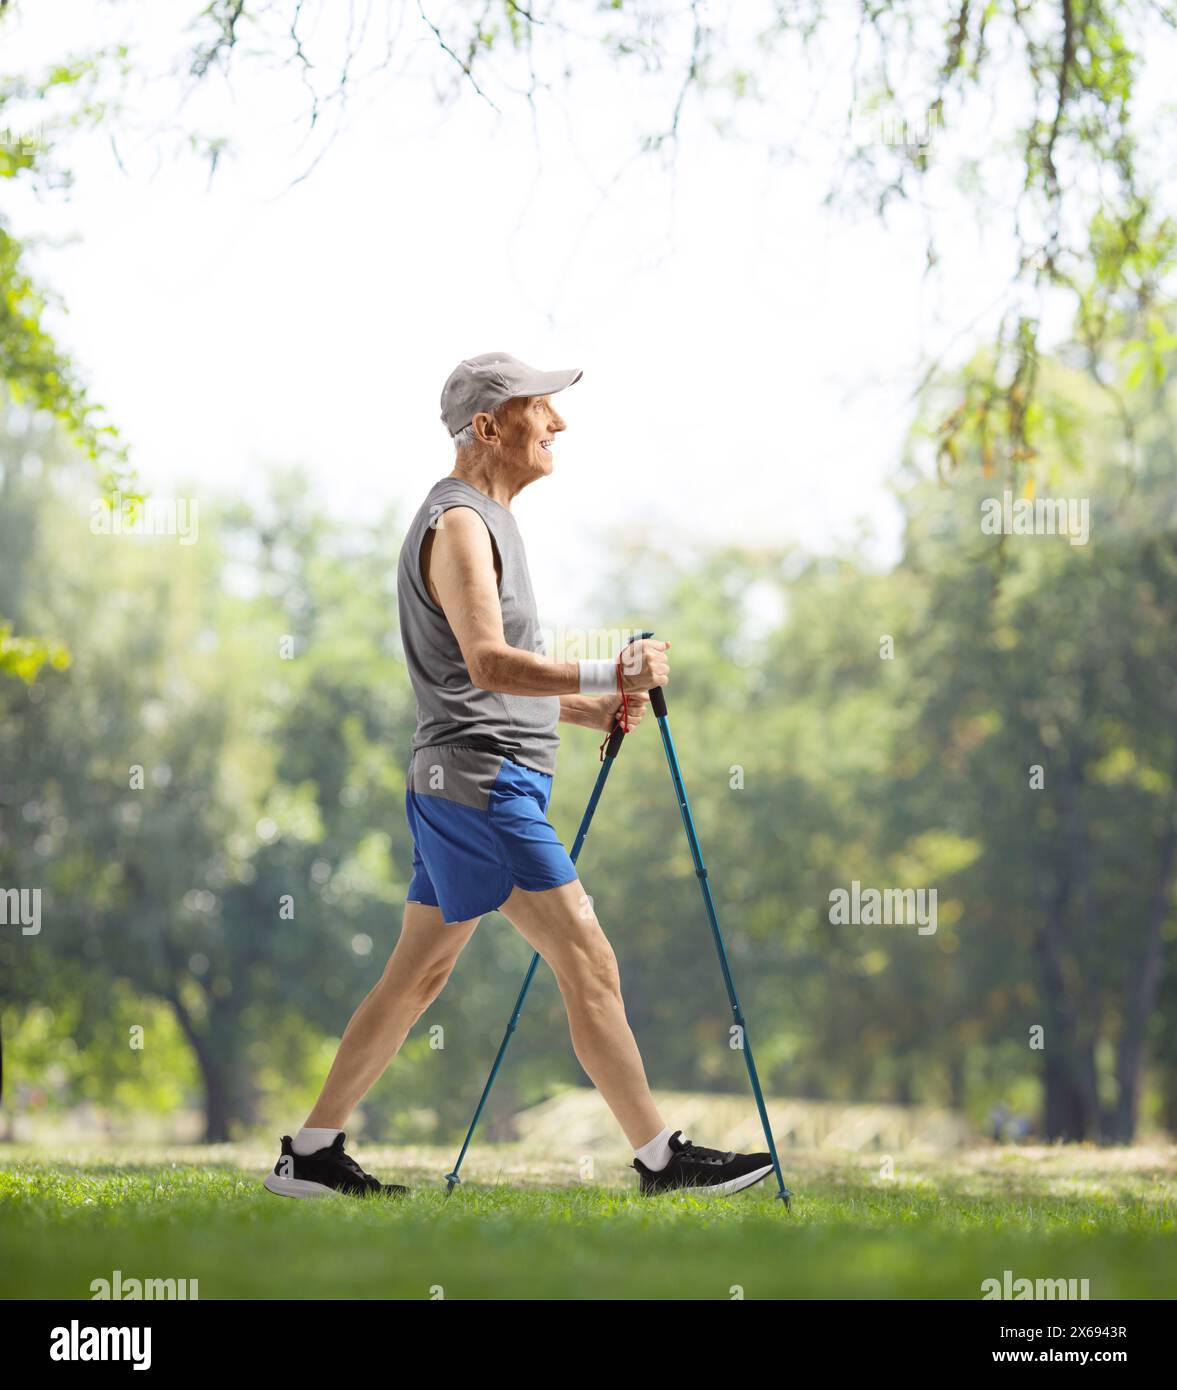 Elderly man walking with poles outdoors in a park Stock Photo